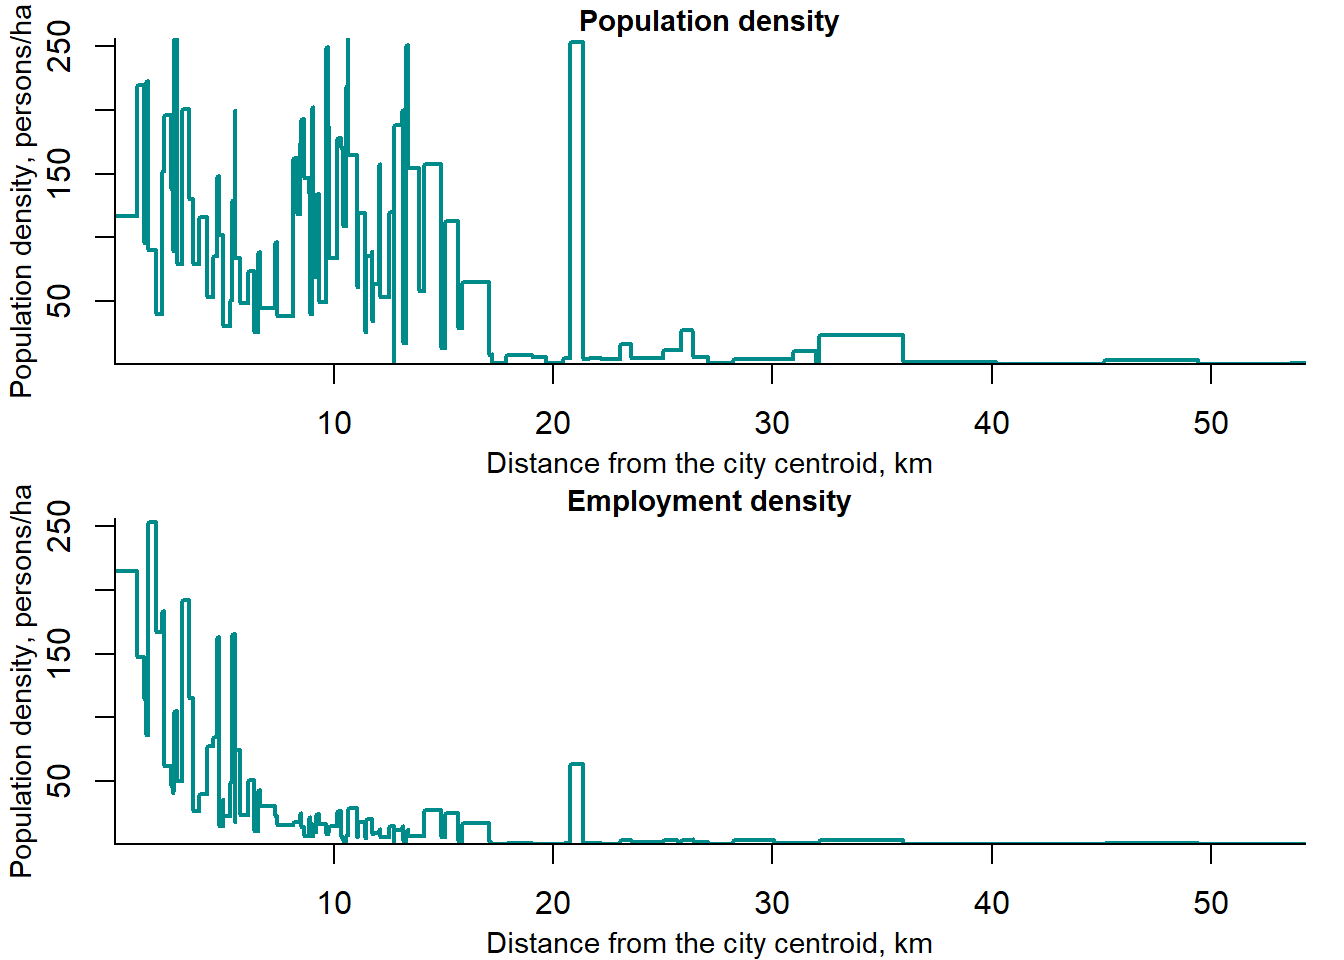 Distribution of population and employment density by distance from the centroid in St. Petersburg, 2015